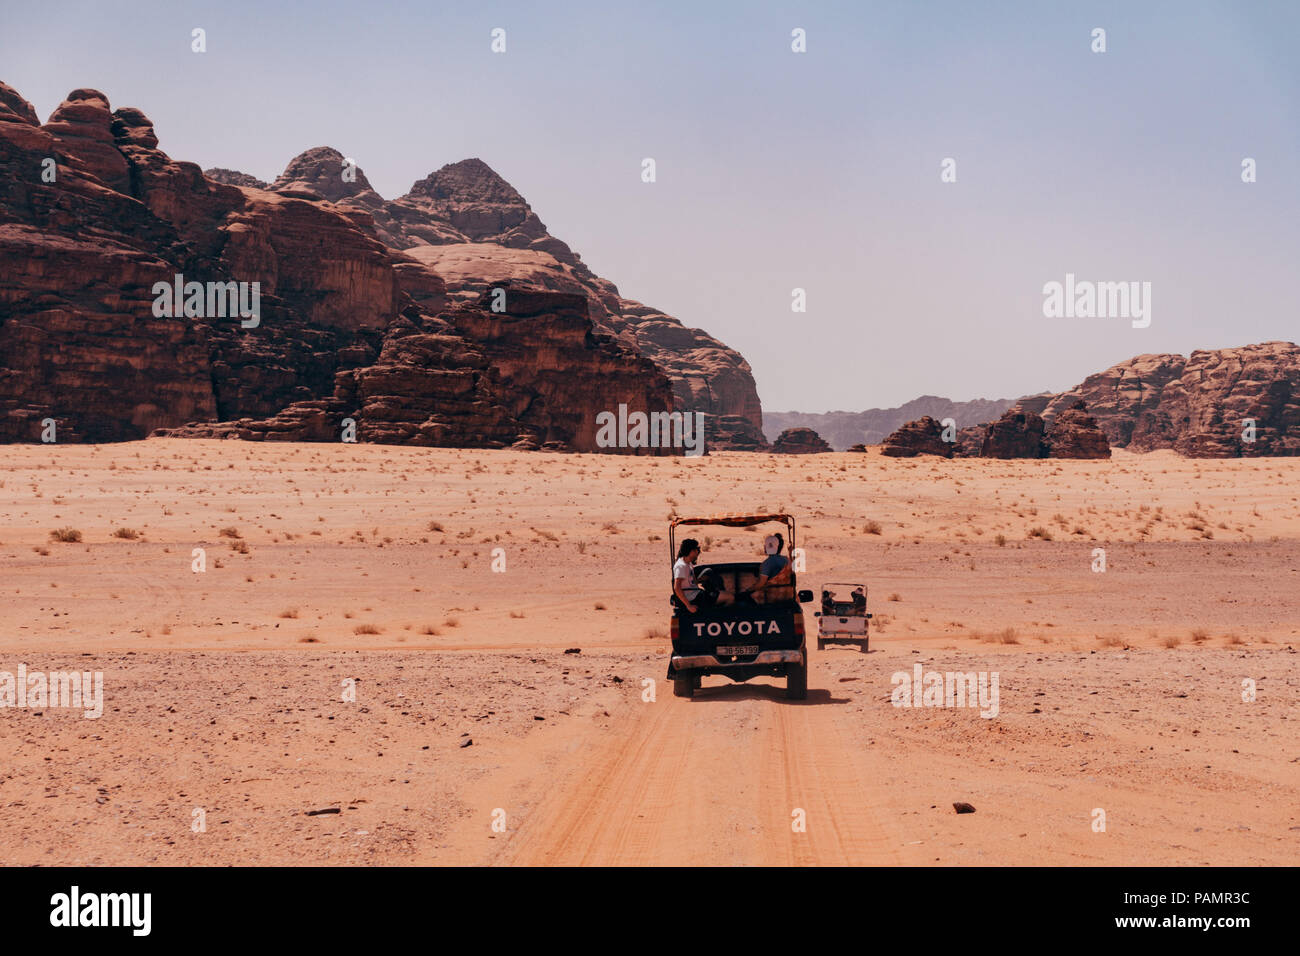 pickup tricks full of tourists drive in a convoy across the red desert sands in the famous Wadi Rum National Park, Jordan Stock Photo